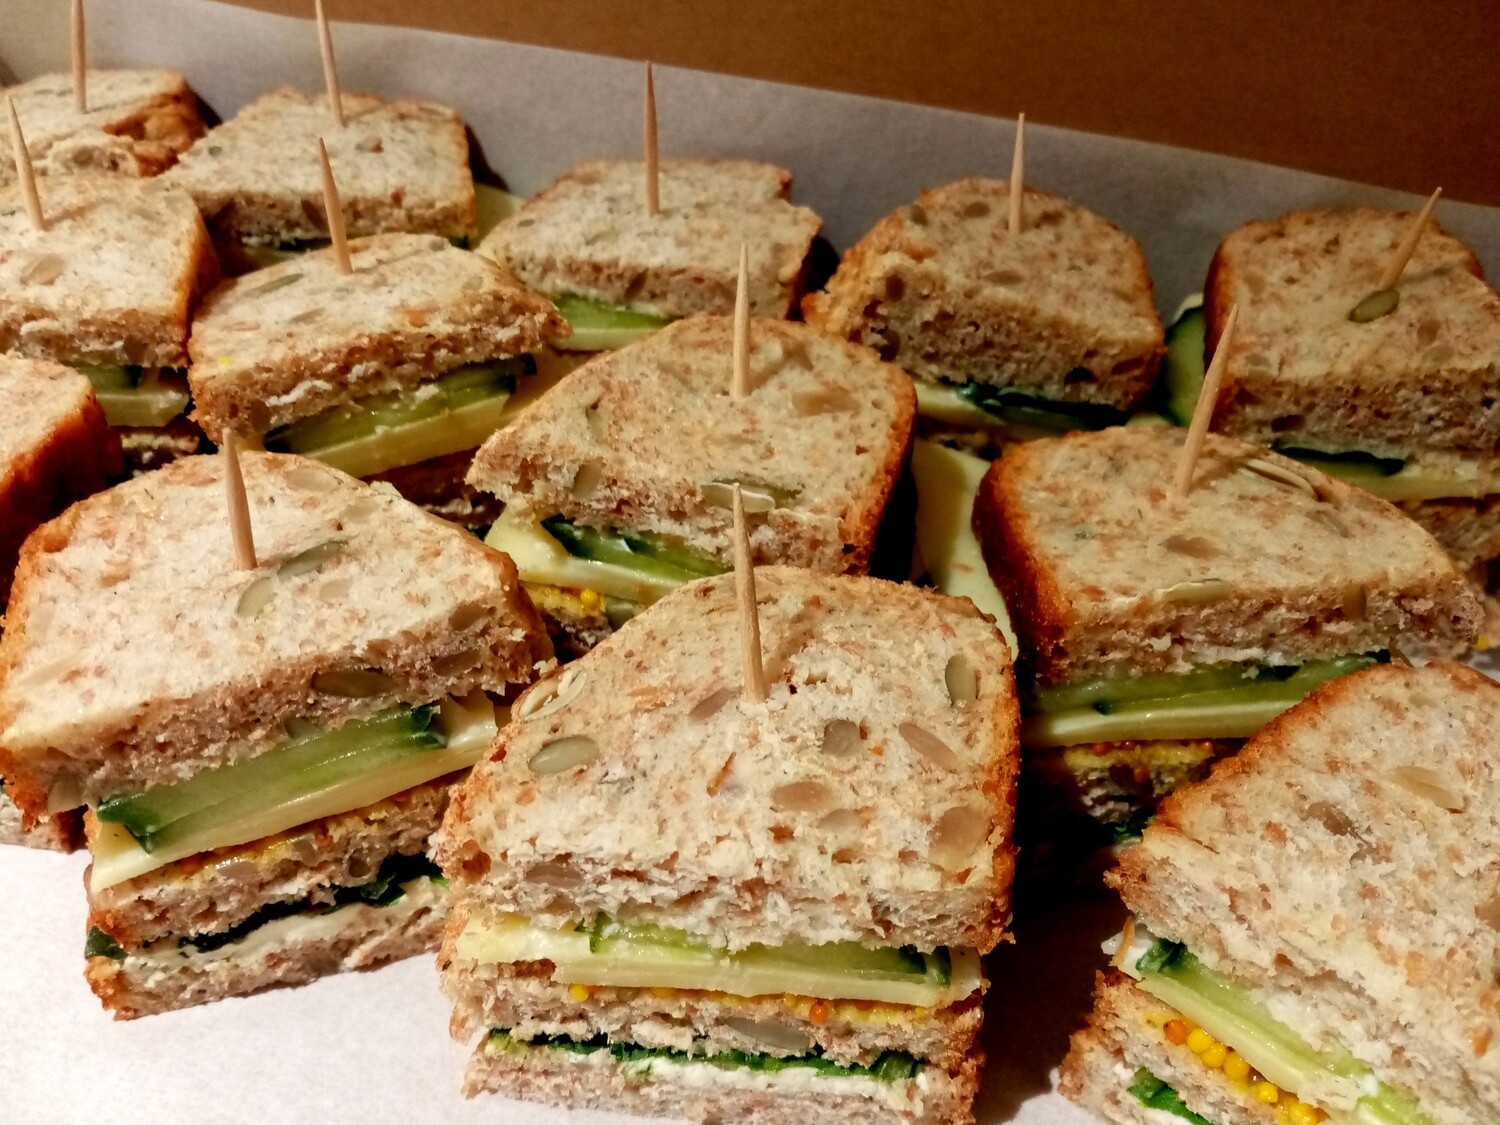 10x mini wholemeal spelt and seed club sandwiches with cream cheese, edam, mustard, cucumber, mayonnaise and greens.